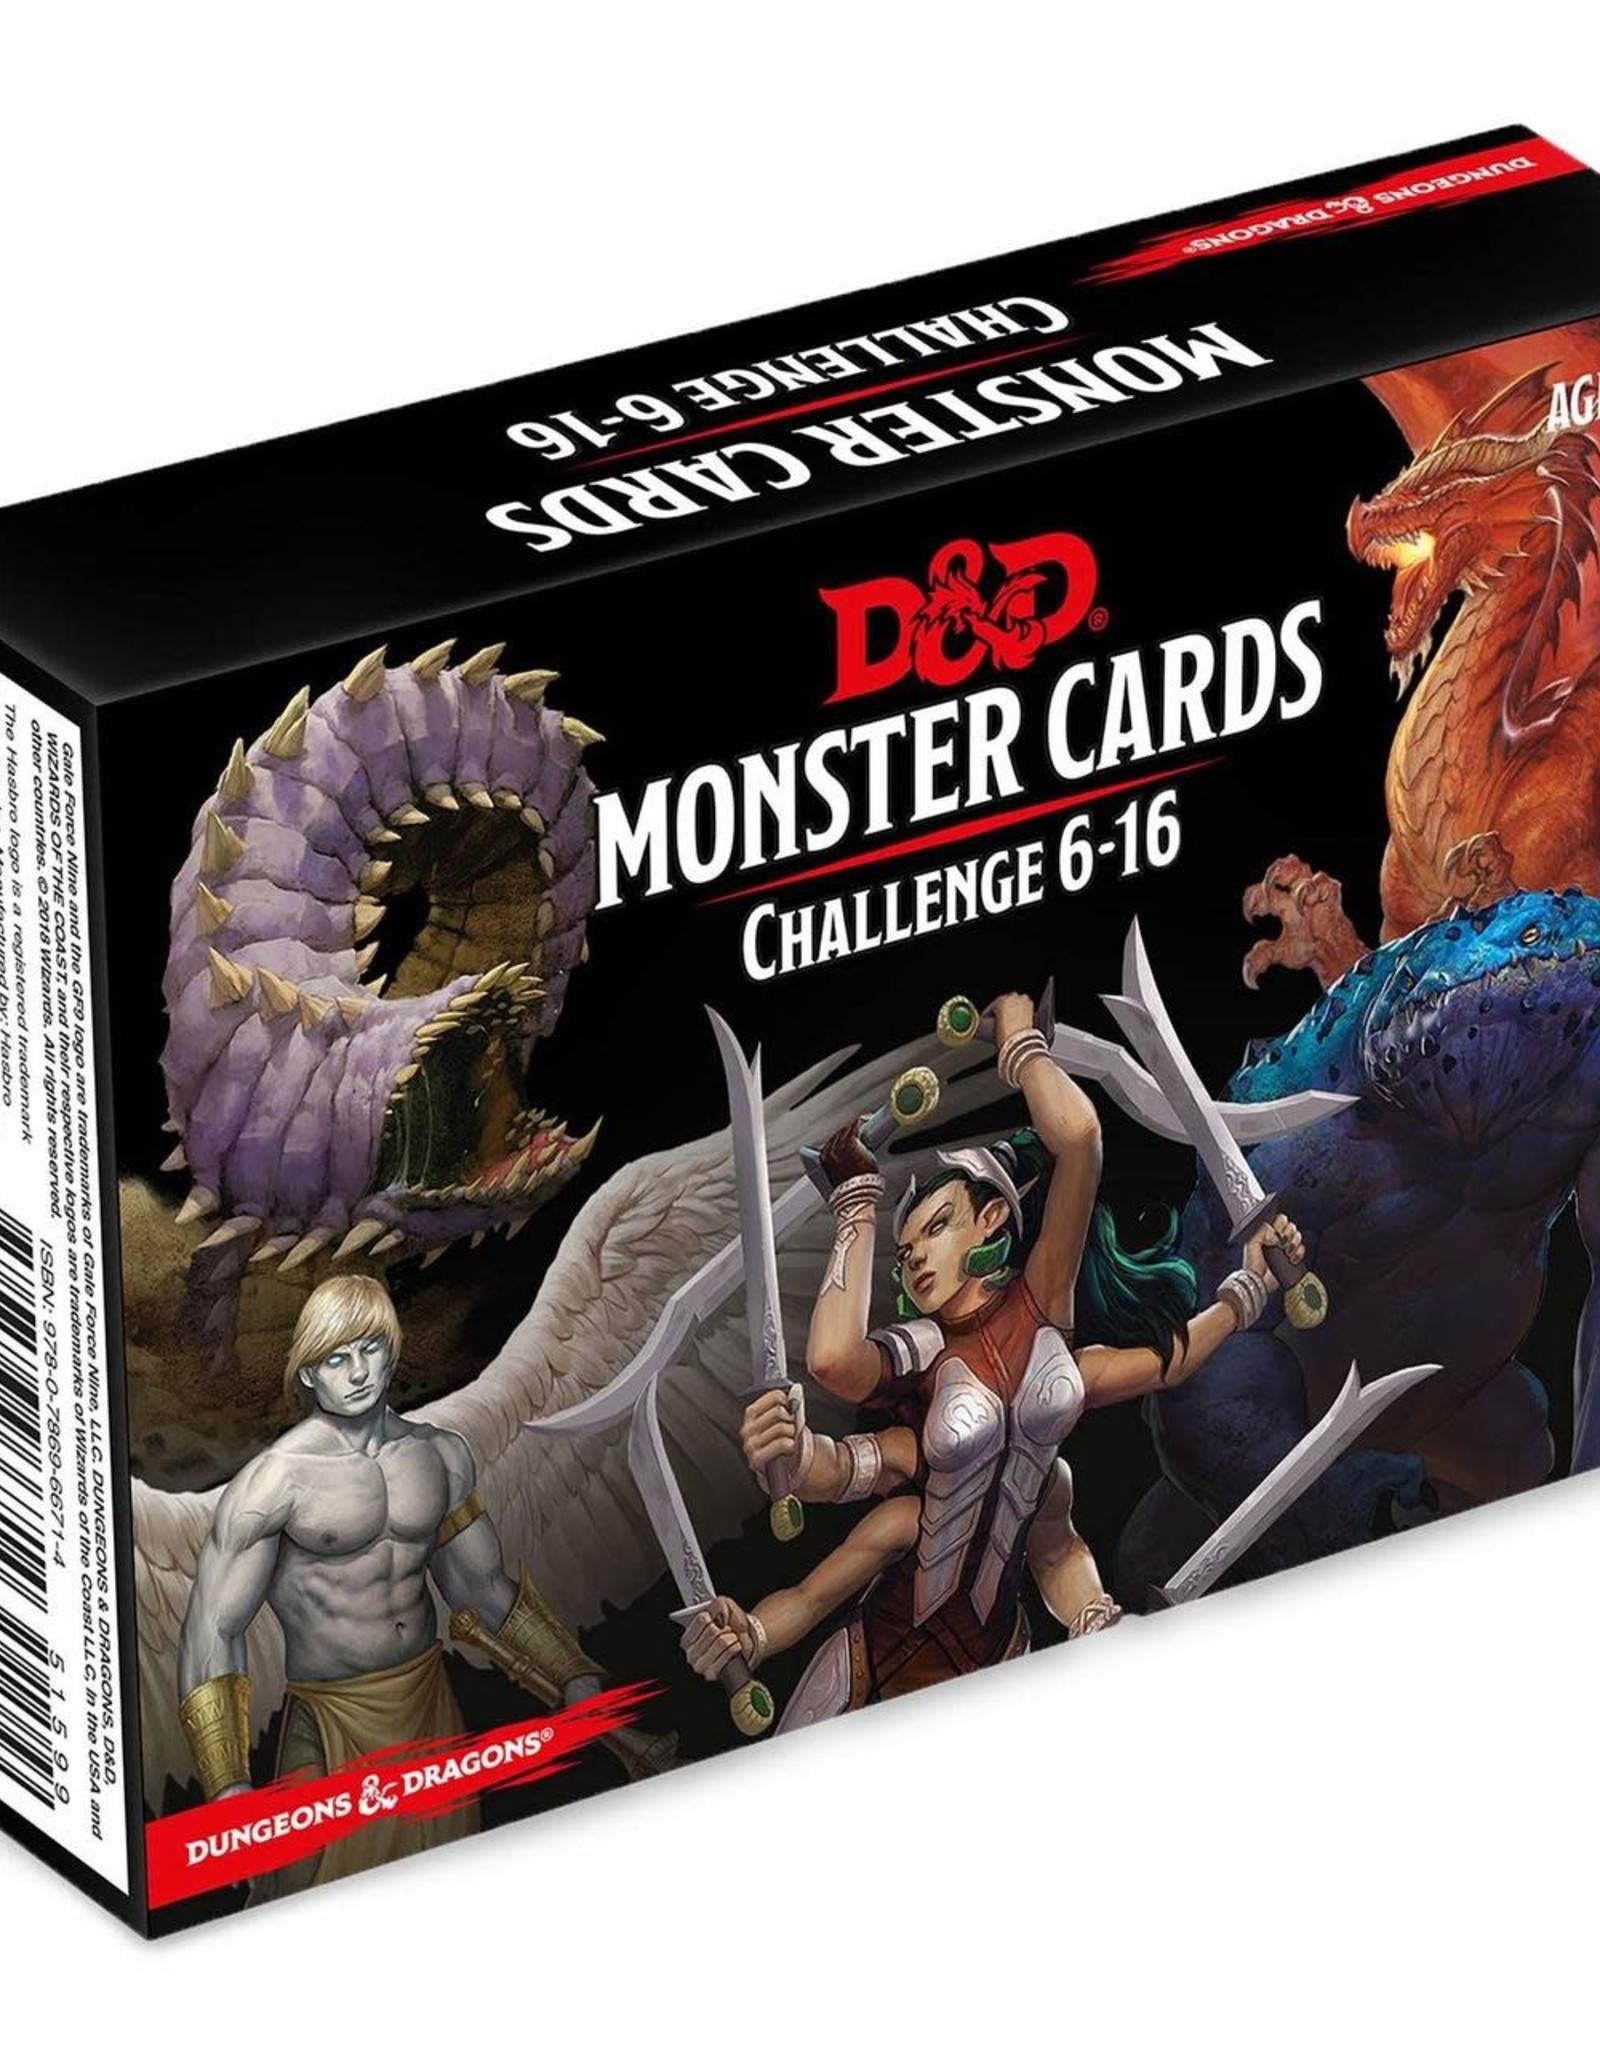 Wizards of the Coast Dungeons & Dragons Monster Cards Challenge 6-16